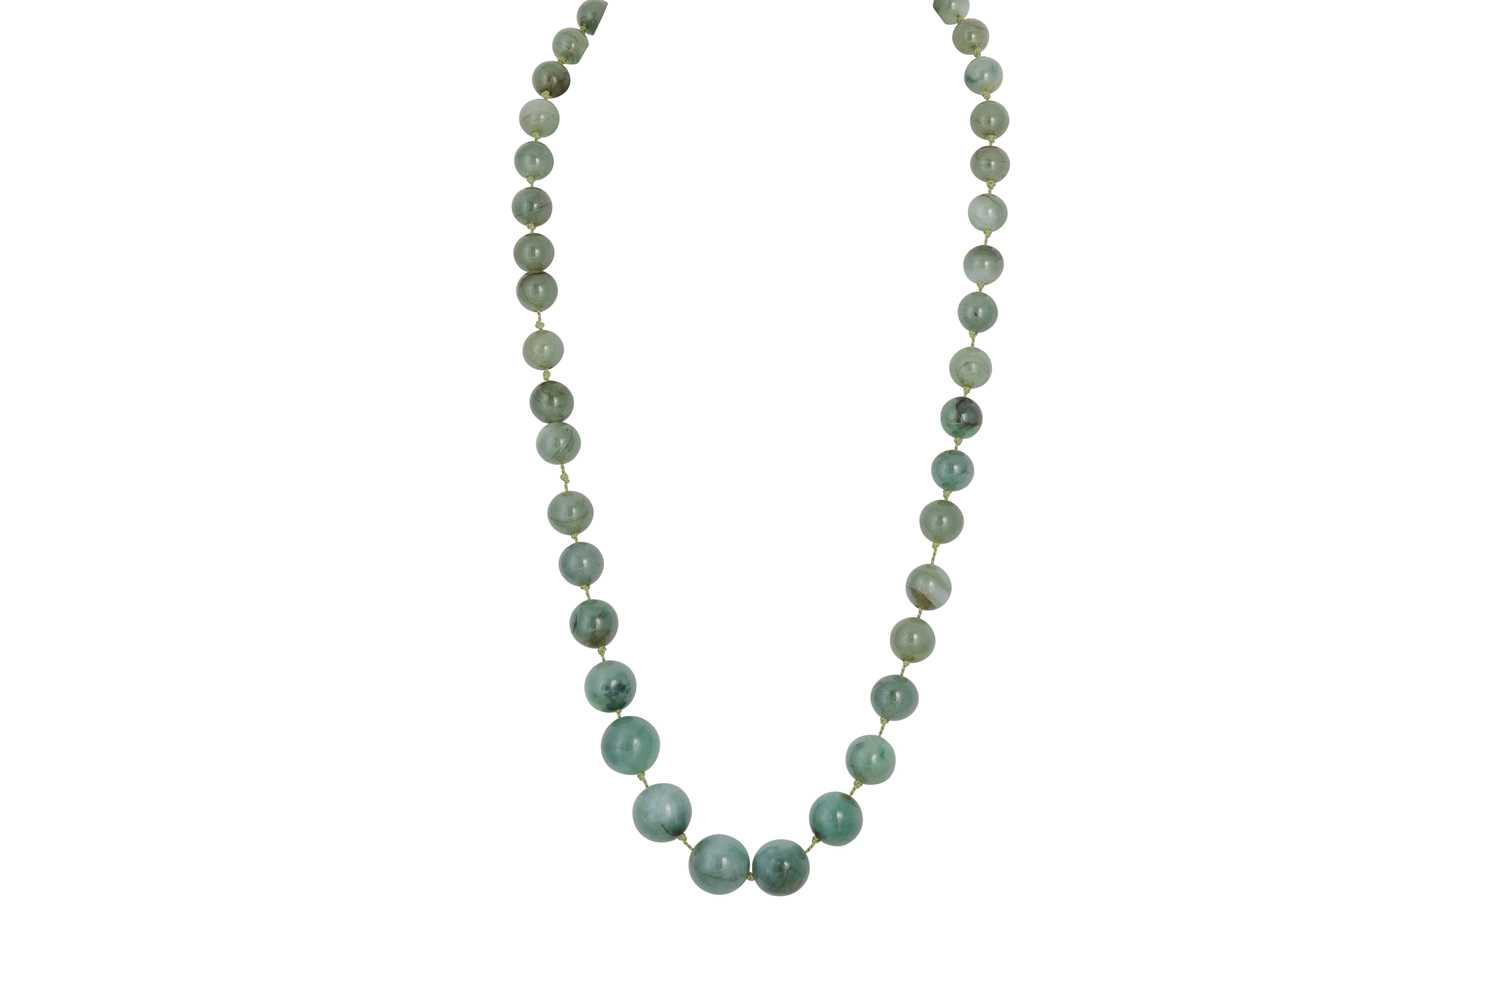 Lot 220 - A GRADUATED JADE BEADED NECKLACE, gold ball clasp